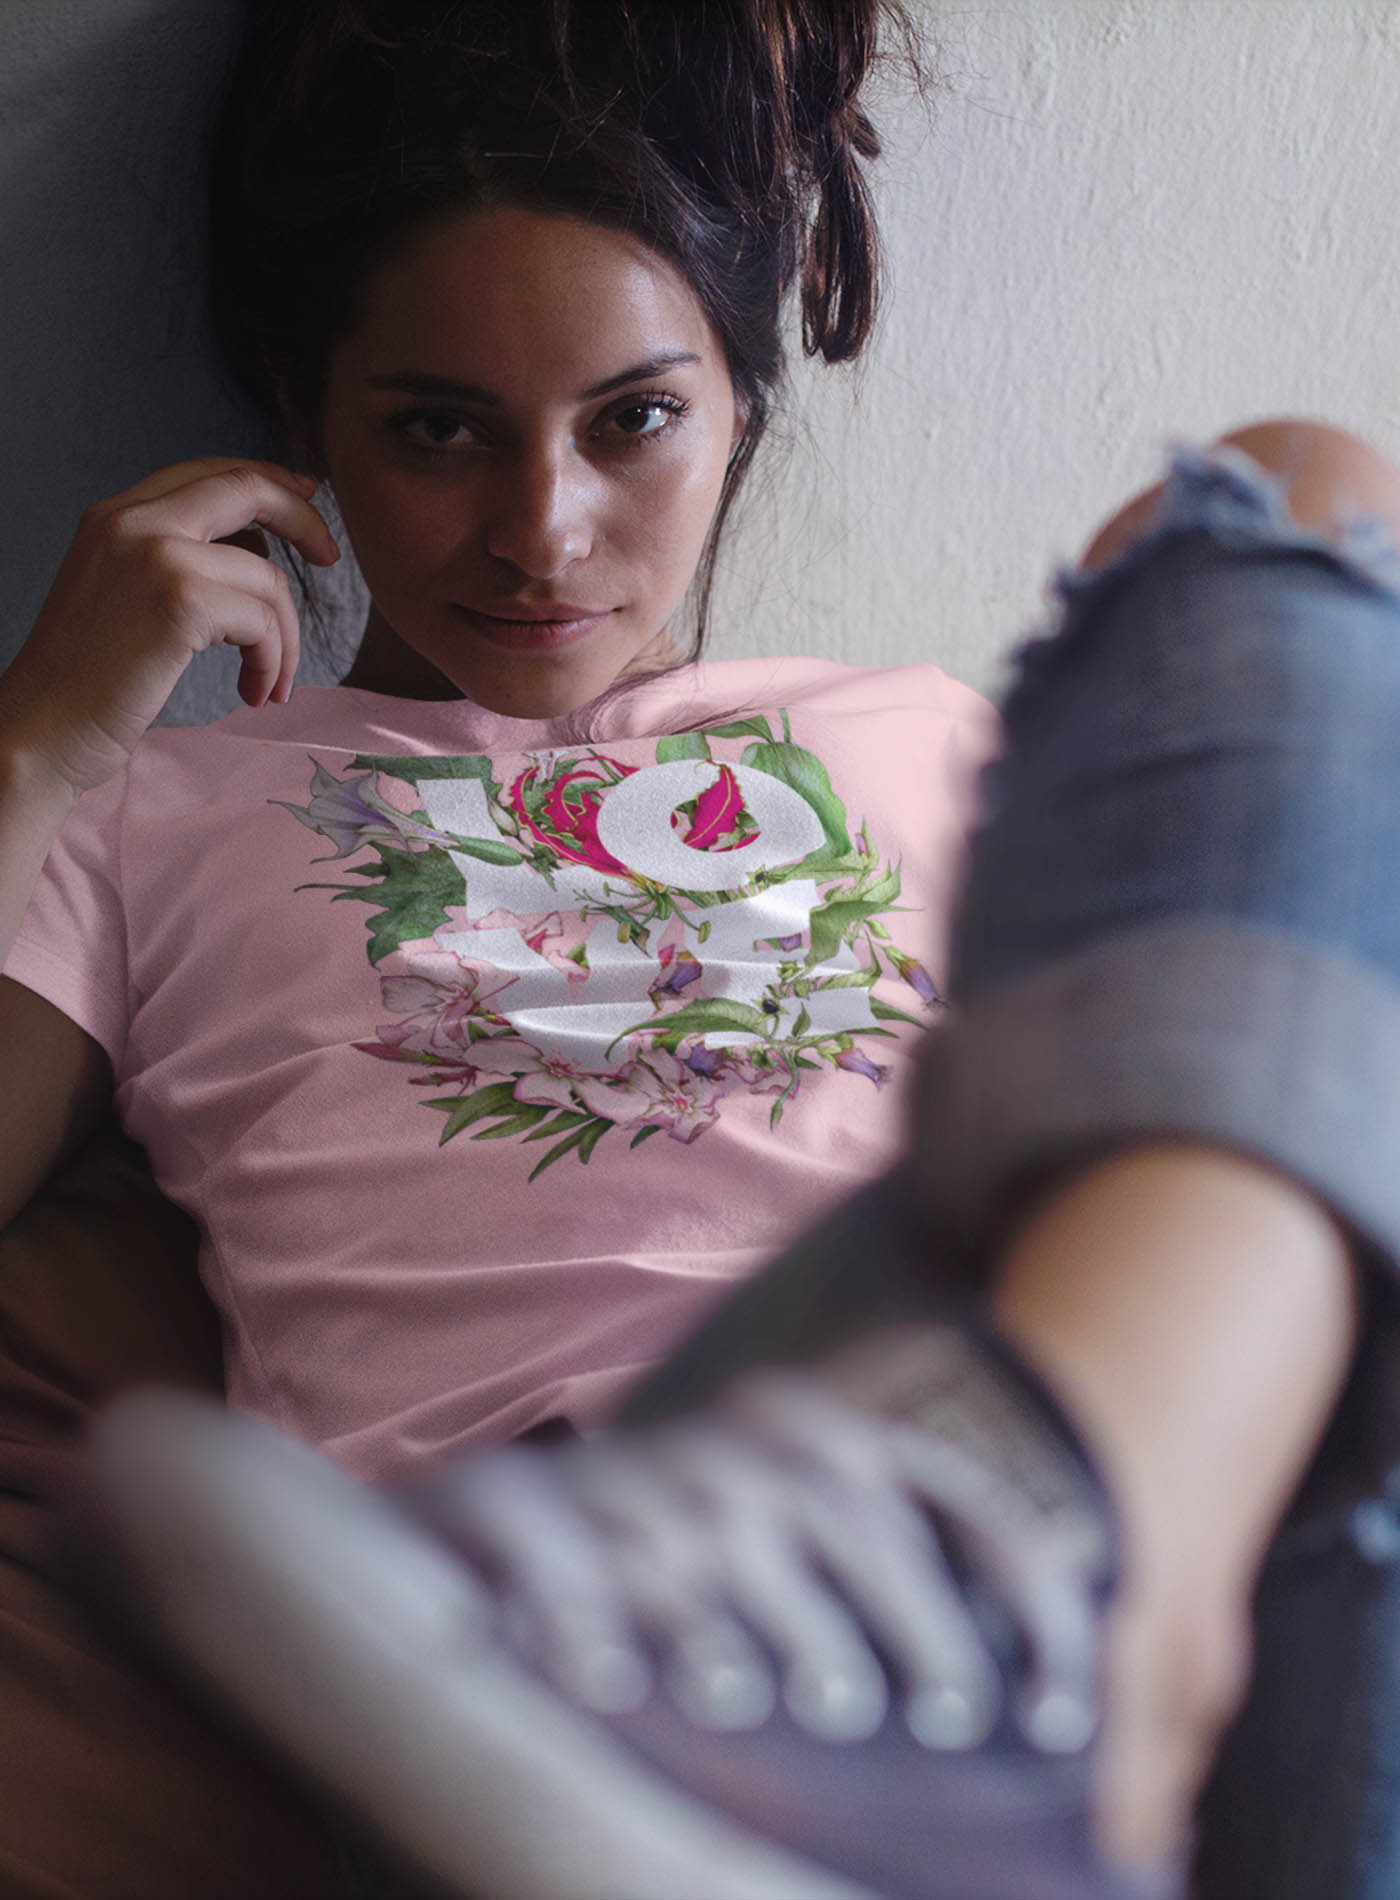 Female modeling a Pink unisex t-shirt featuring the word LOVE surrounded by poisonous flowers such as oleander, fire lily, belladonna and toloache.